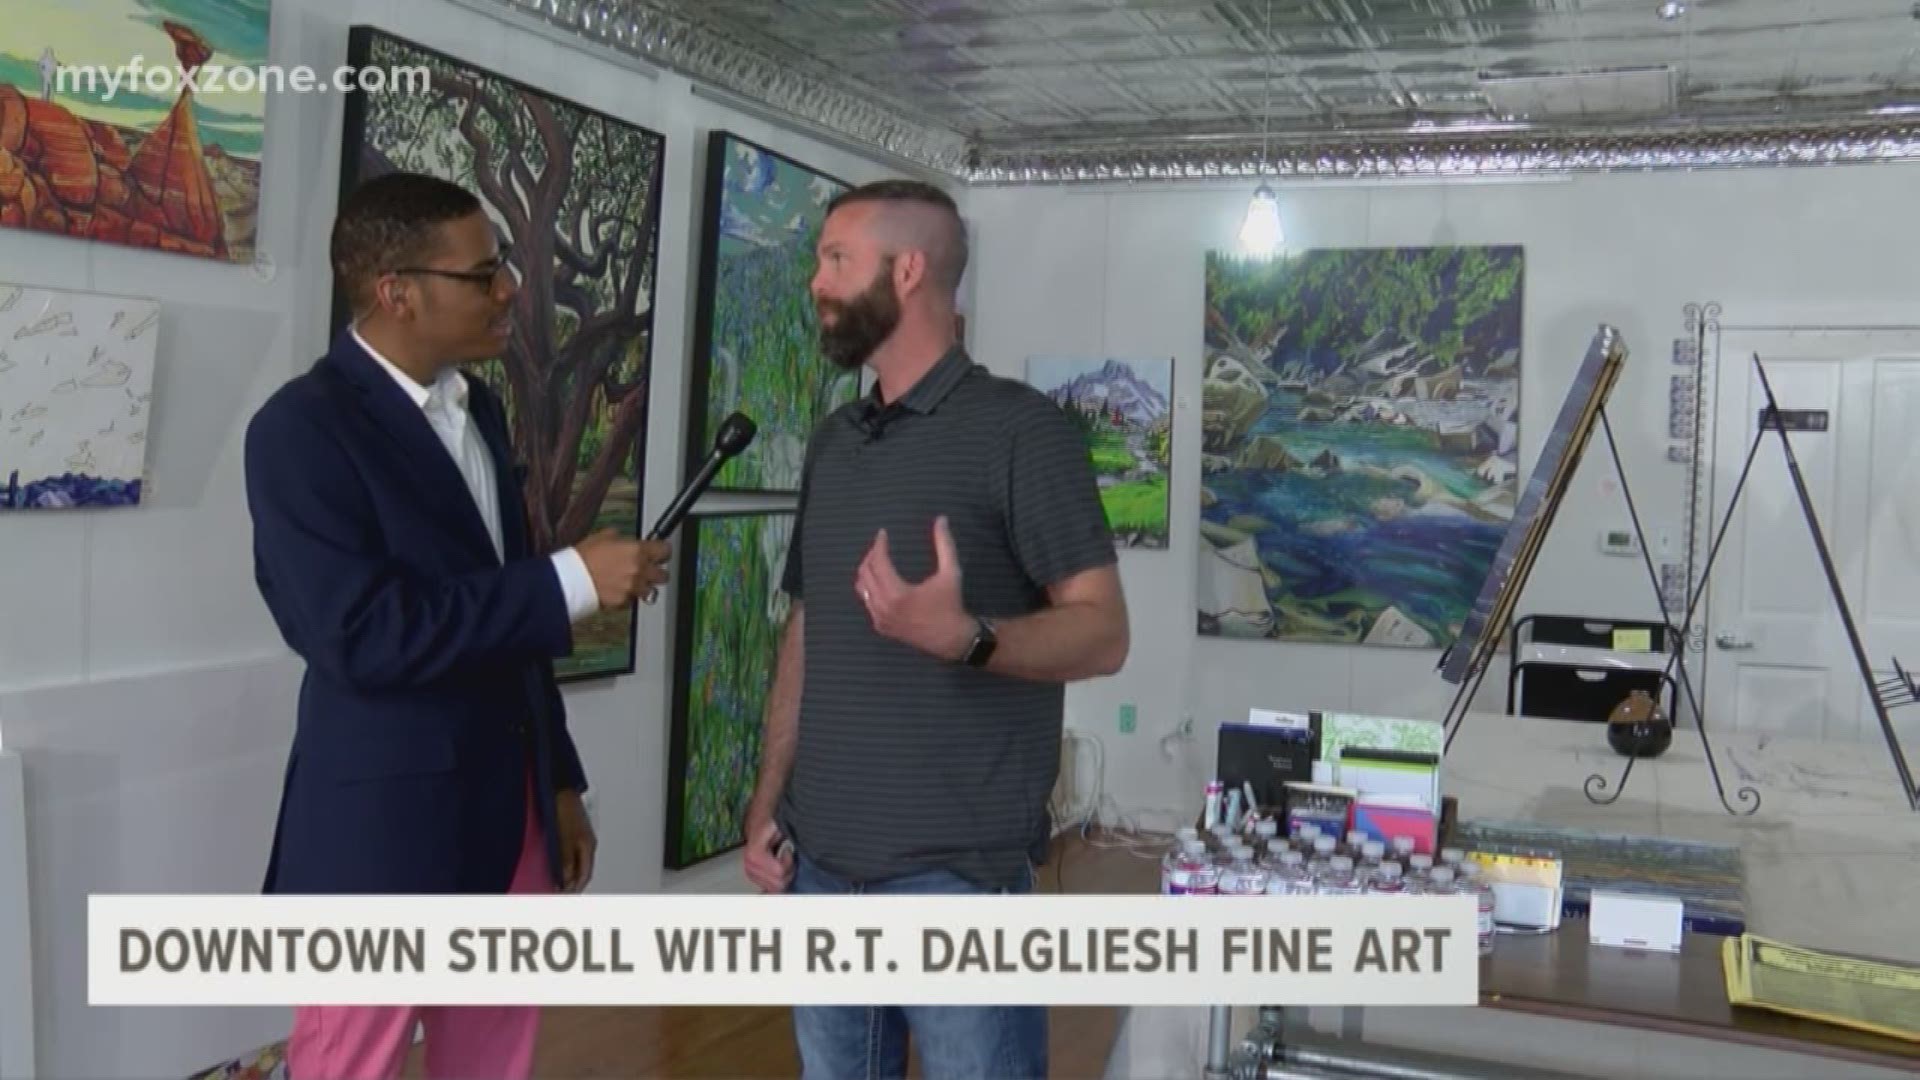 Our Malik Mingo is live at R.T. Dalgliesh Fine Art to speak with the featured artist this month for the Downtown Stroll.